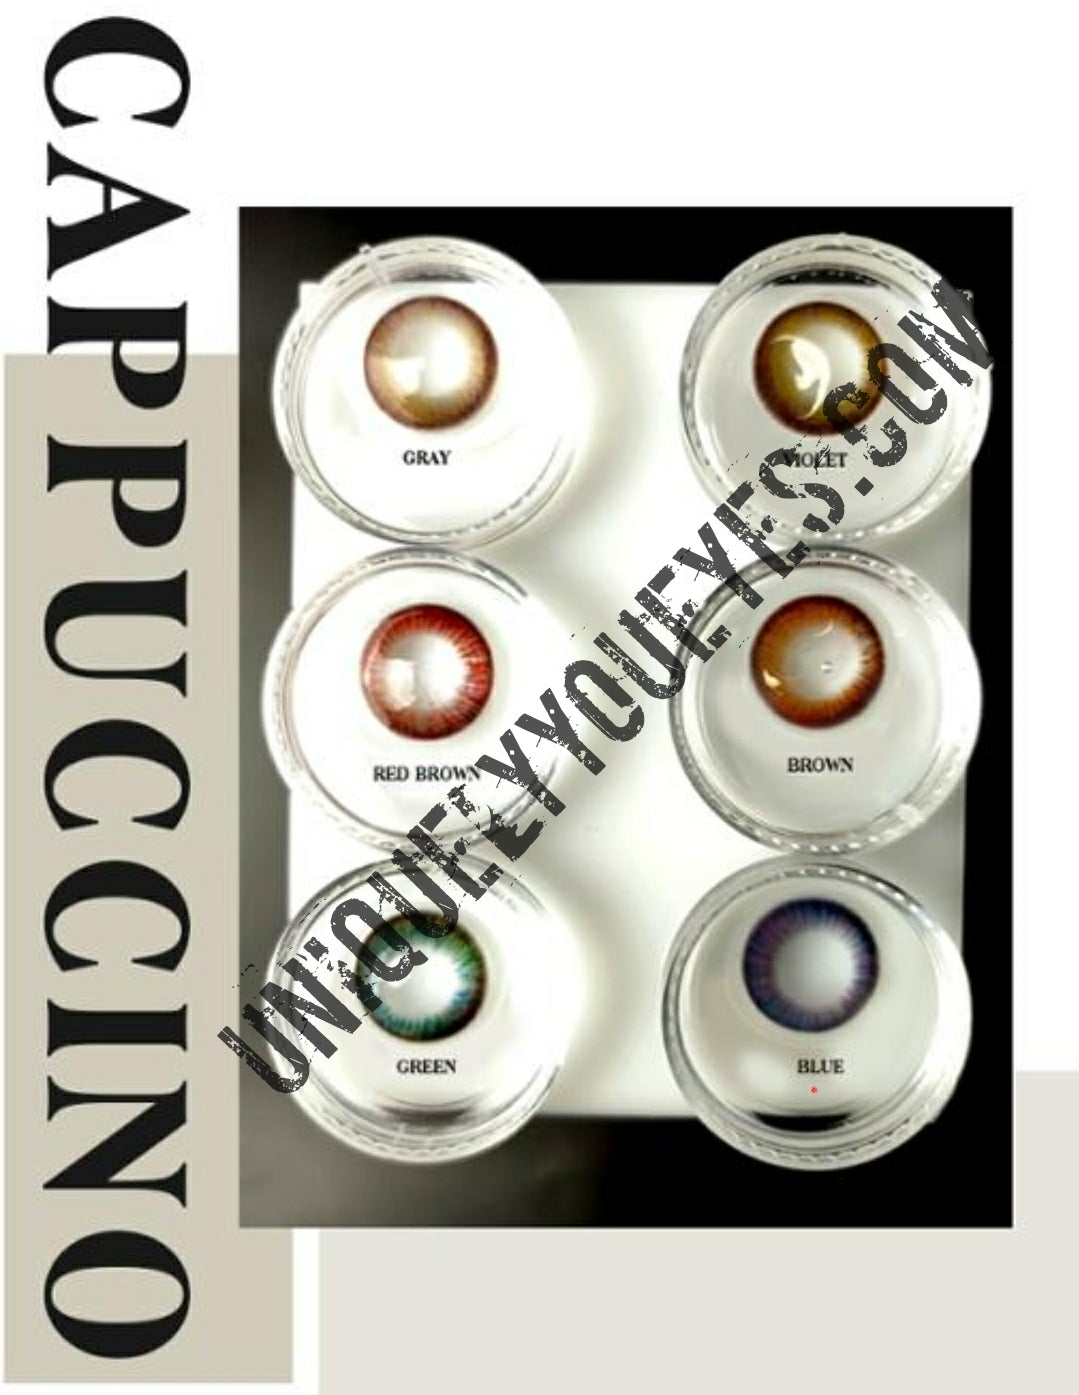 New Arrival ♡ CAPPUCCINO Natural Red Brown colored contacts